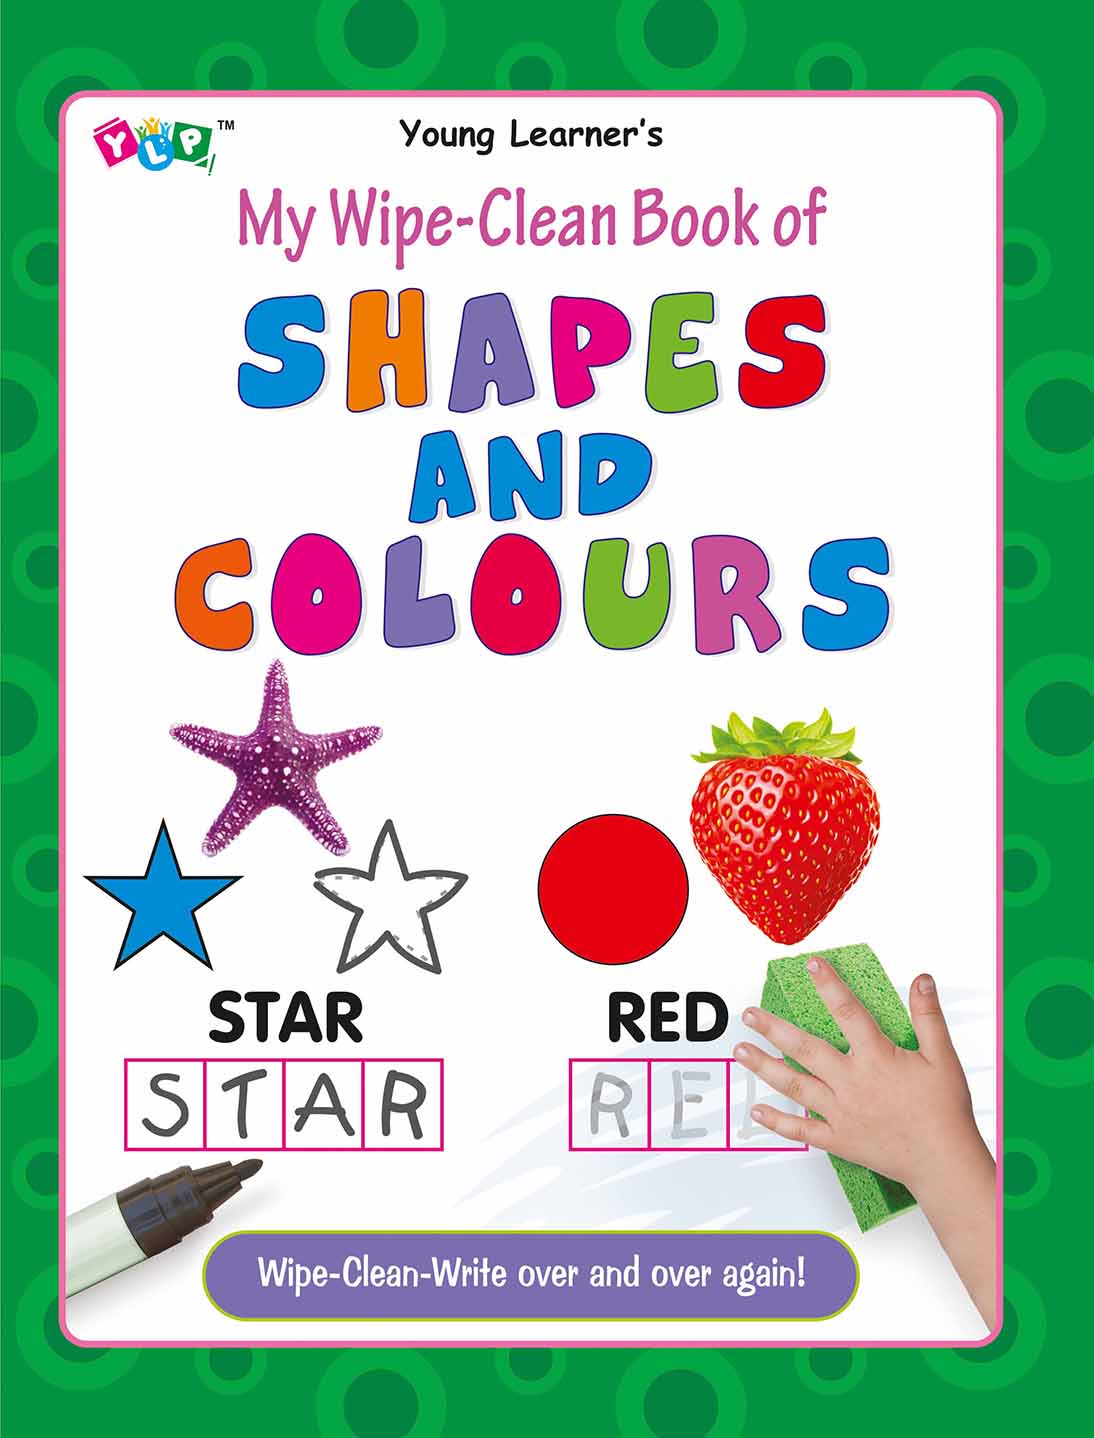 My Wipe-Clean Book of Shapes and Colours